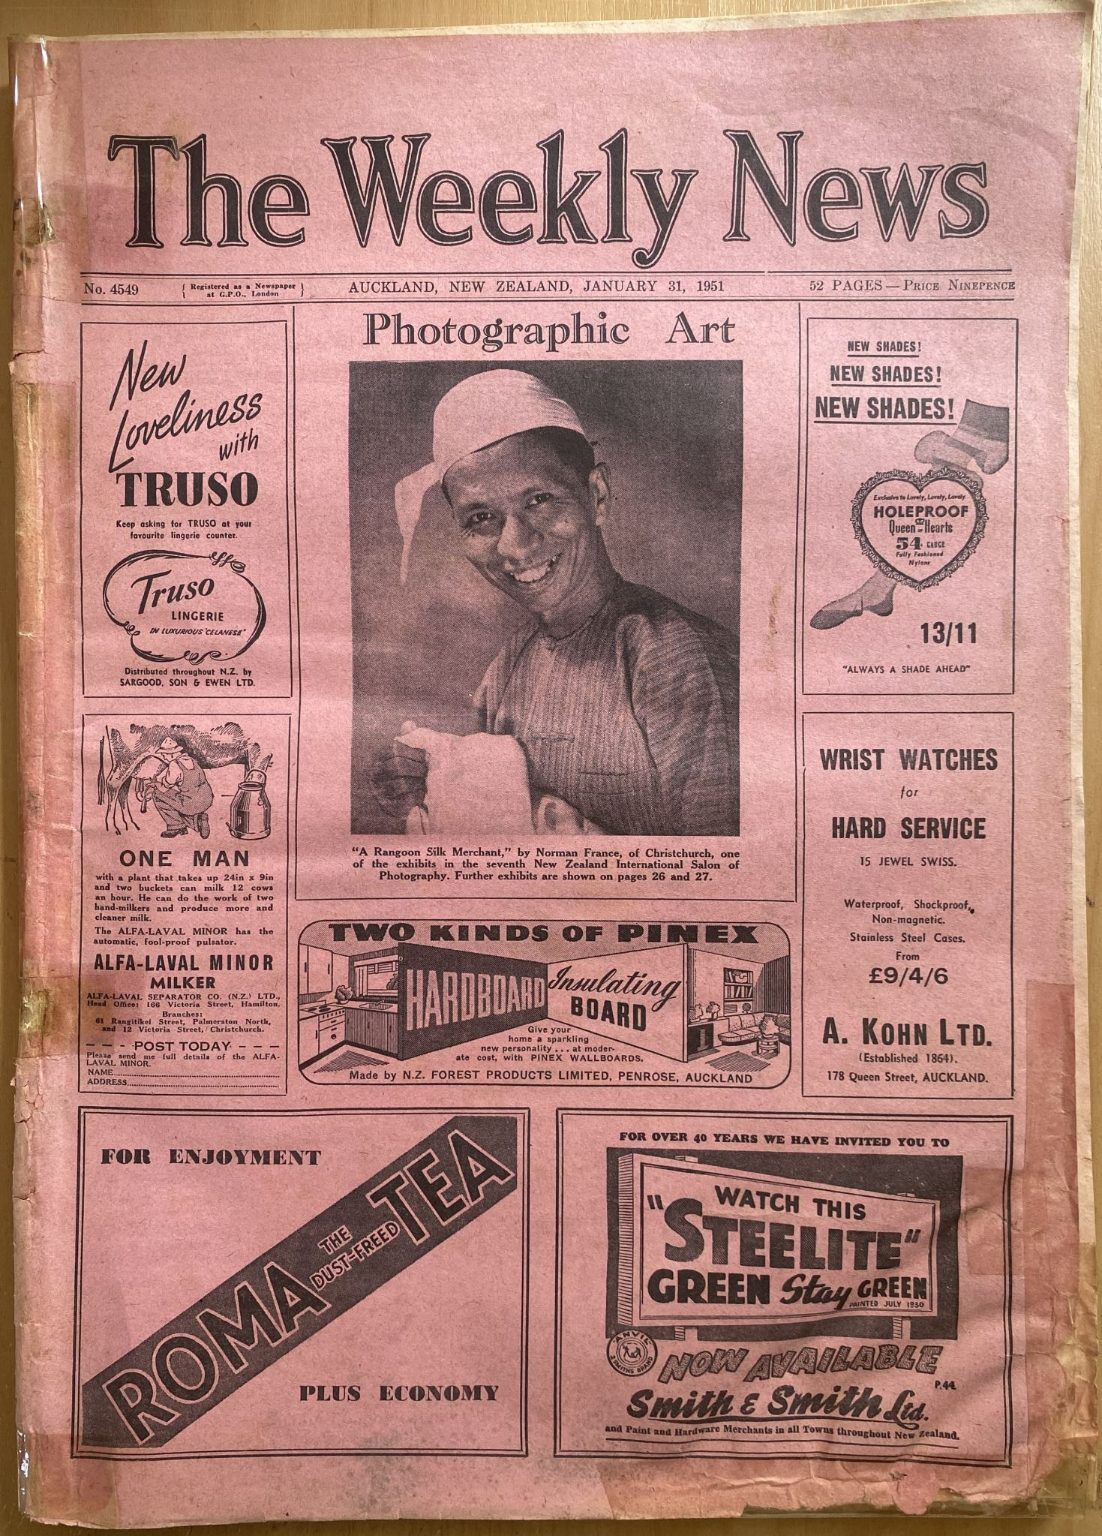 OLD NEWSPAPER: The Weekly News - No. 4549, 31 January 1951